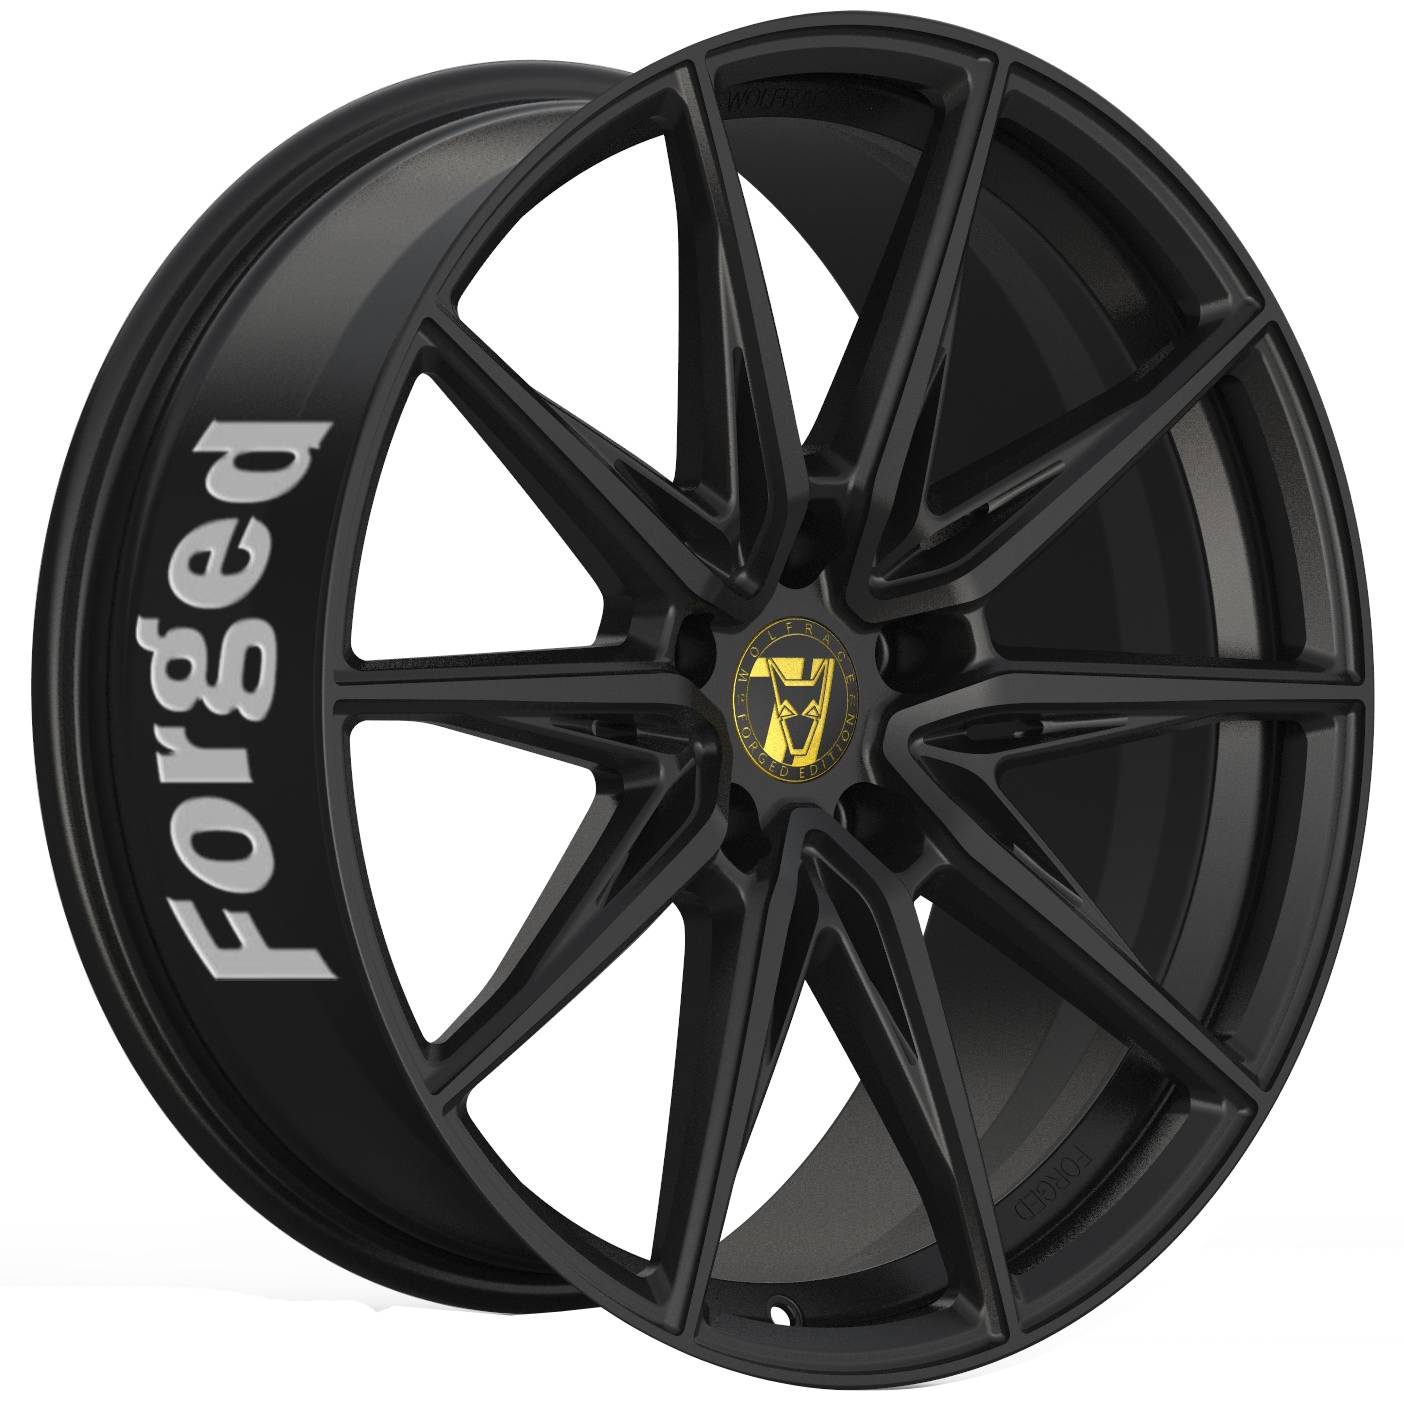 Demon Wheels 71 Forged Edition Urban Racer Forged [11x24] -5x130- ET 45